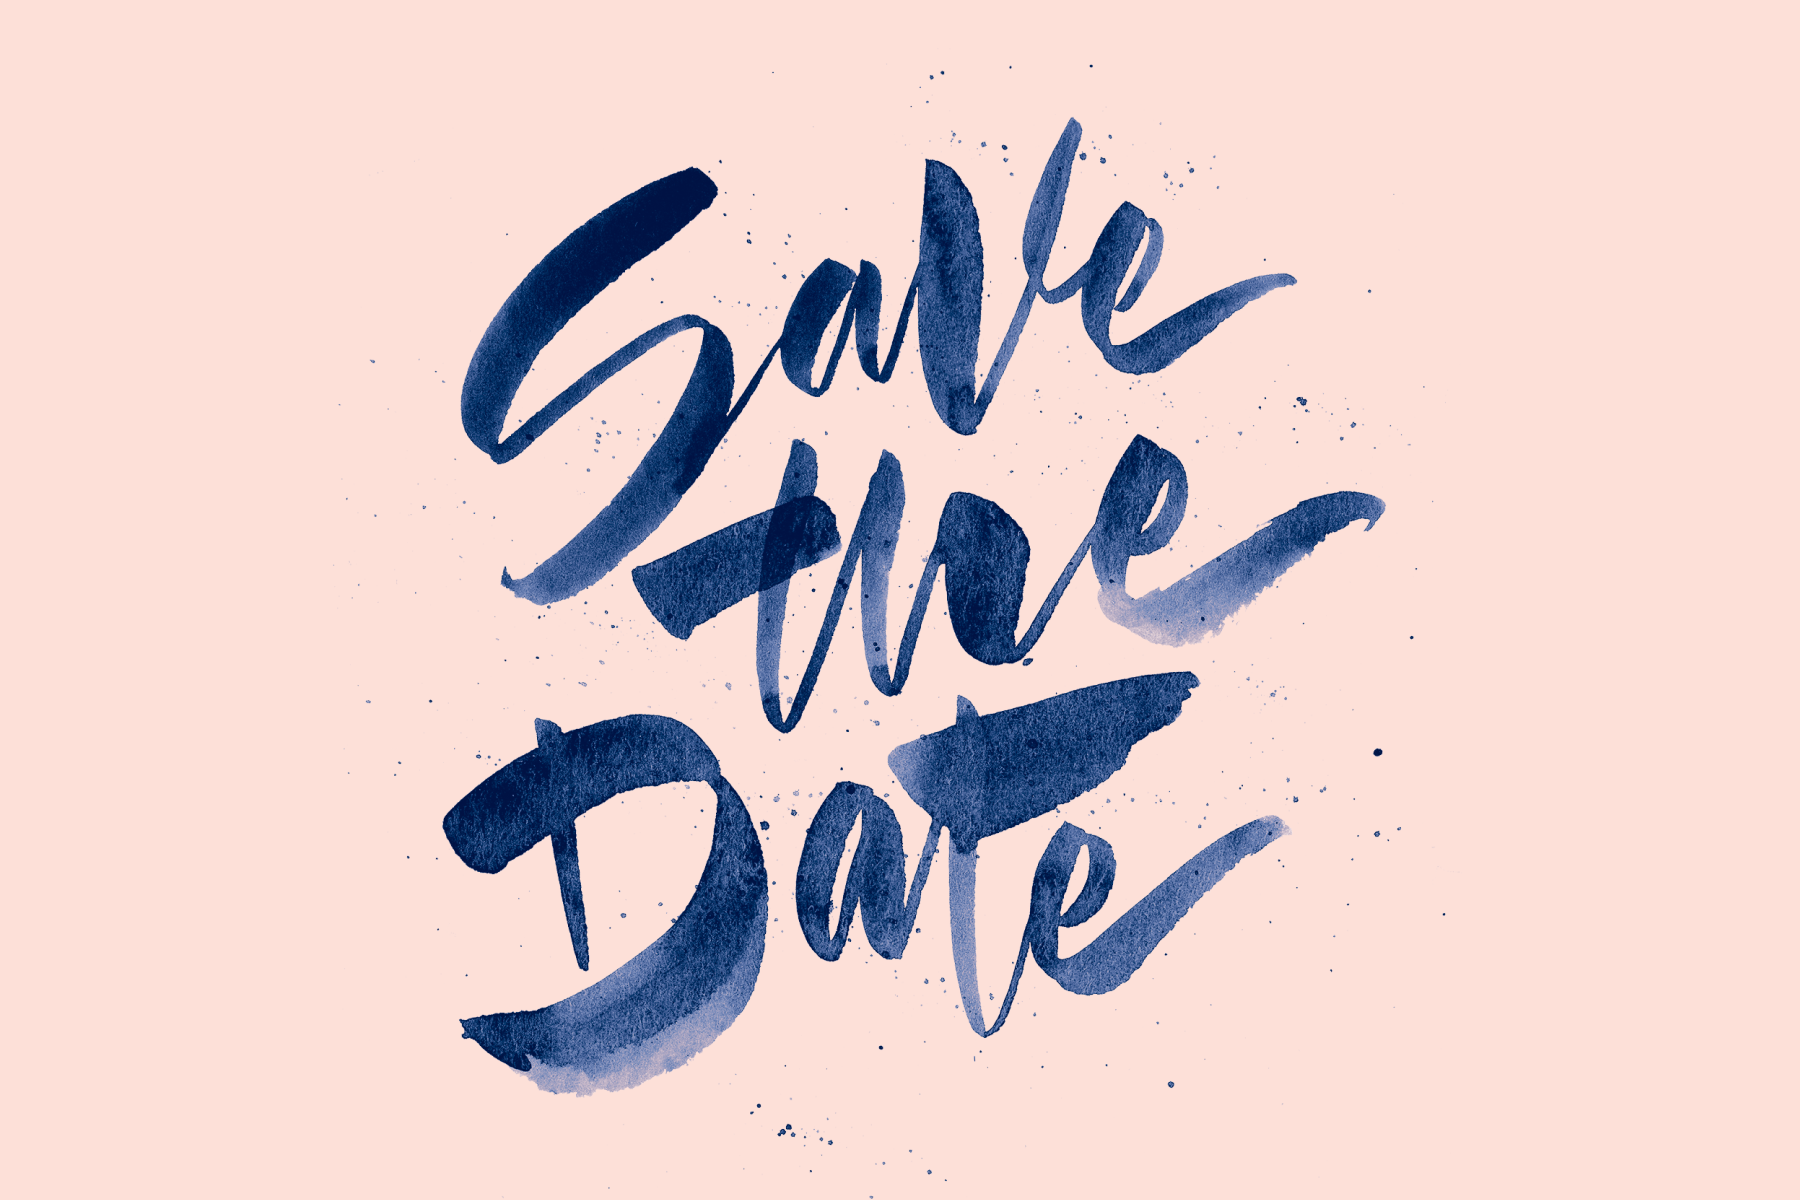 The words “Save the date” in blue paint on a pink background.